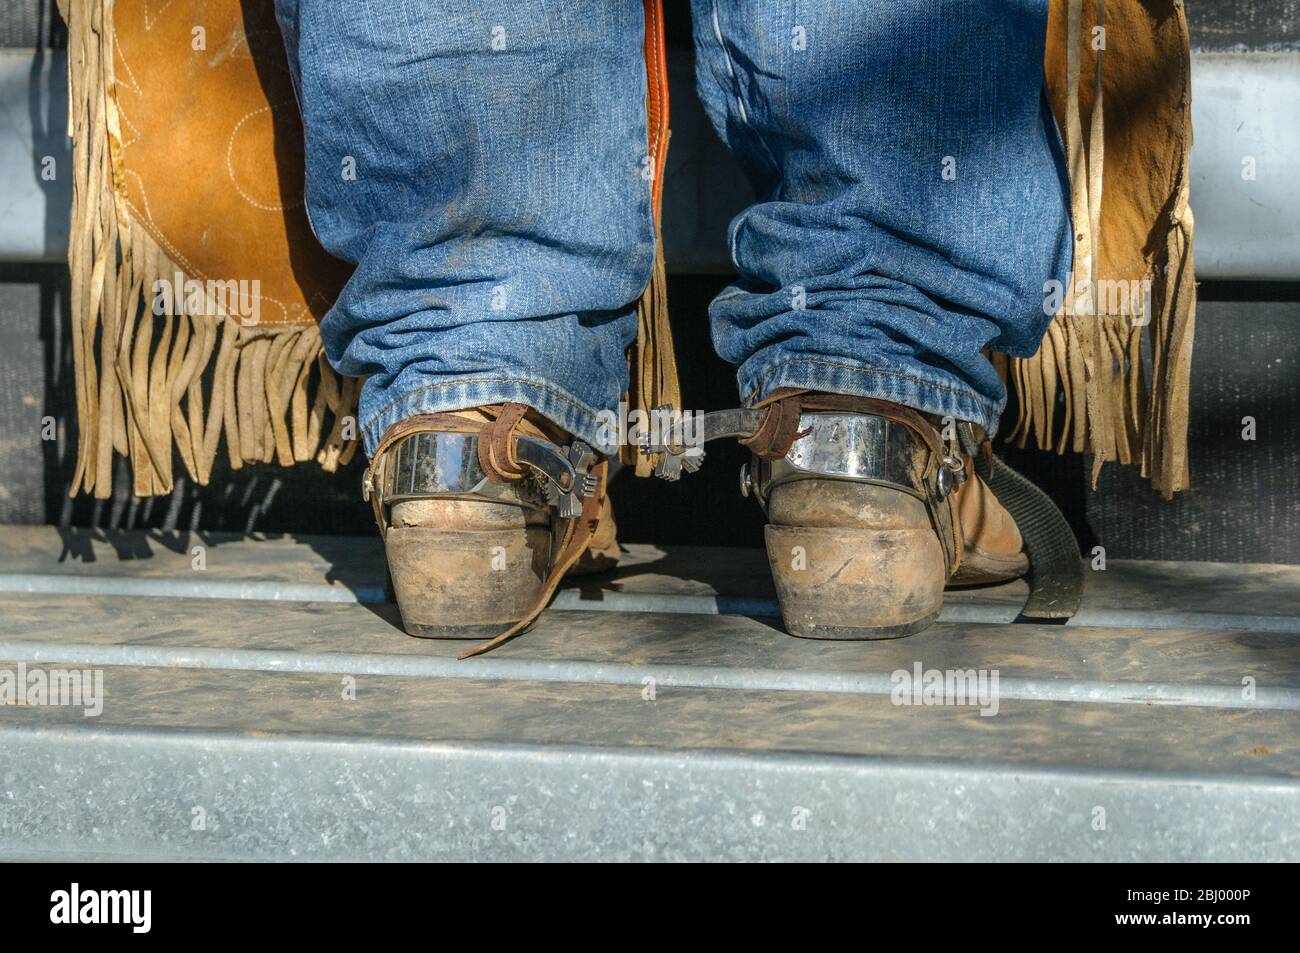 Lower legs of rodeo rider with jeans, chaps, boots and spurs atop the paltform on one of the chutes, ready to take his ride at Mareeba in Australia. Stock Photo